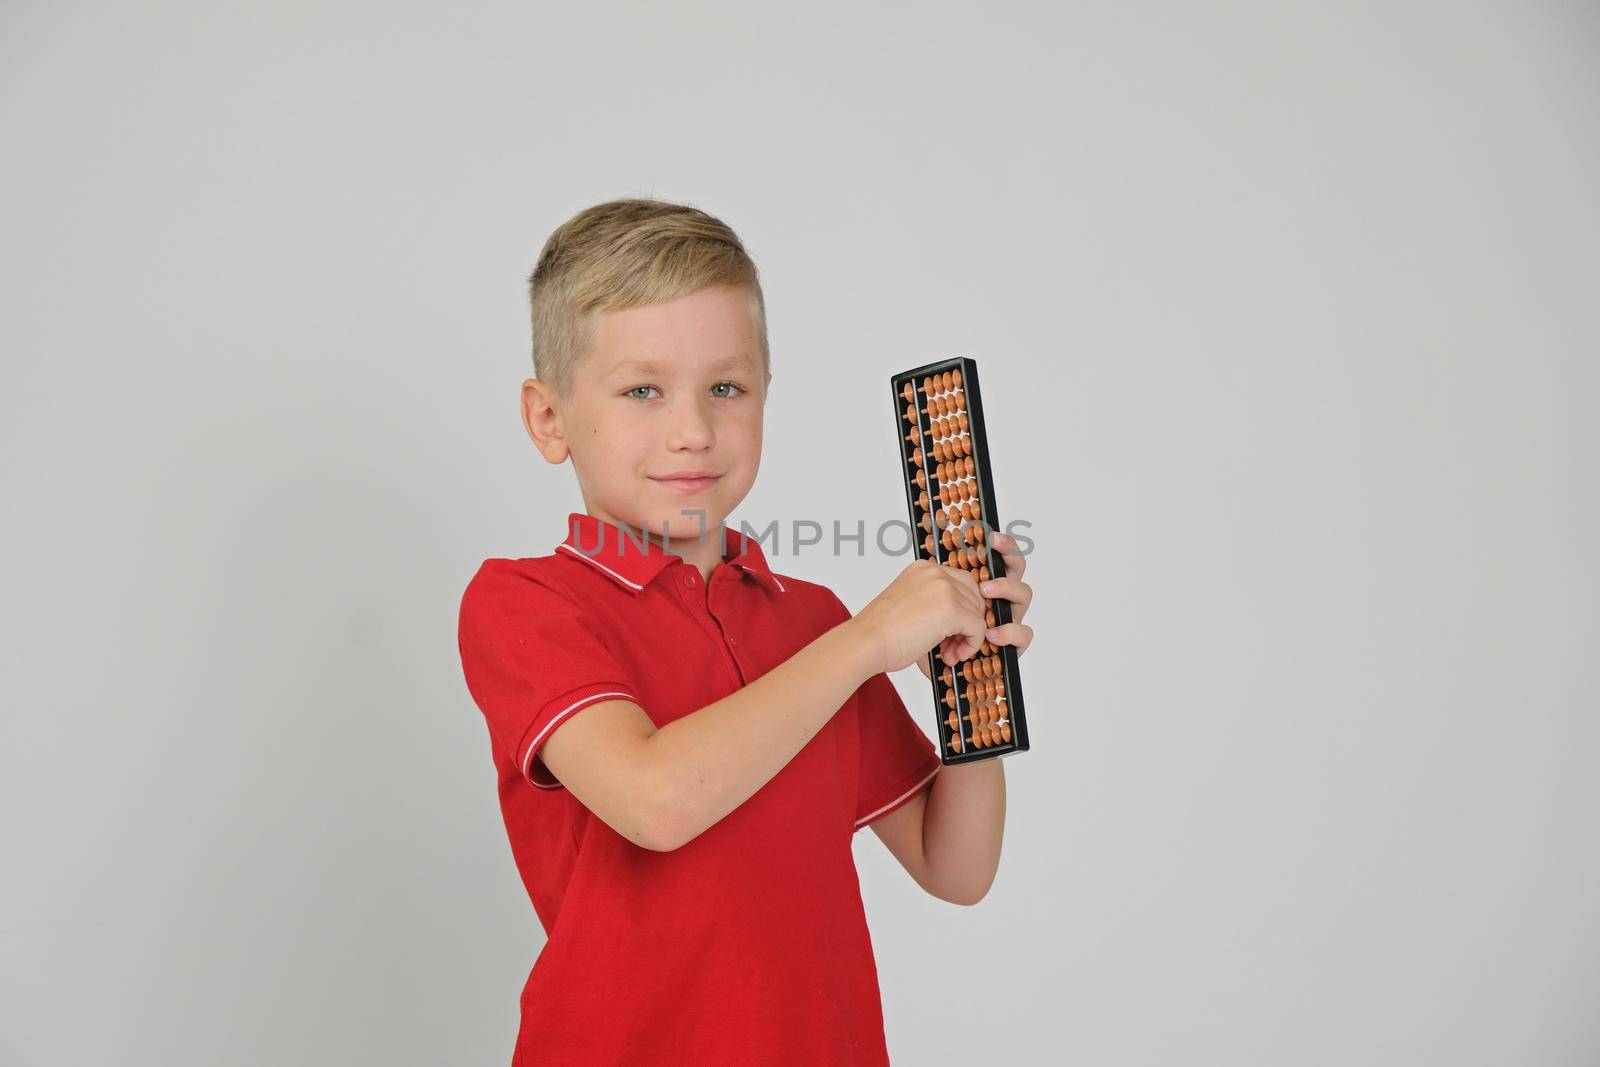 Little boy doing simple math exercises with abacus scores. Mental arithmeric.